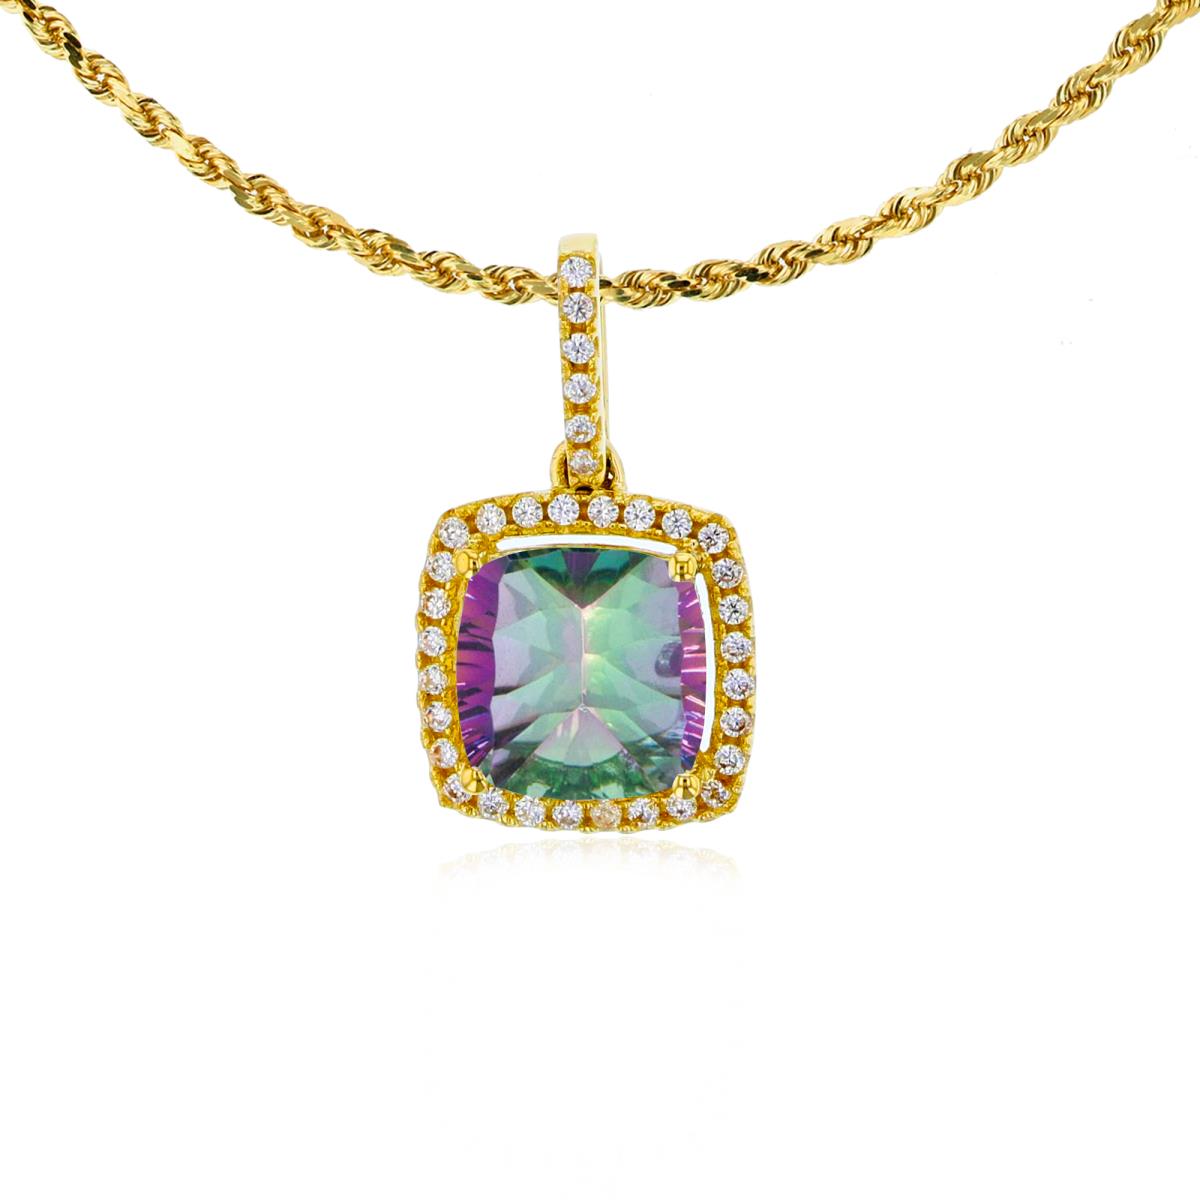 10K Yellow Gold 7mm Cushion Mystic Green Topaz & 0.14 CTTW Rnd Diamond Halo 18" Rope Chain Necklace